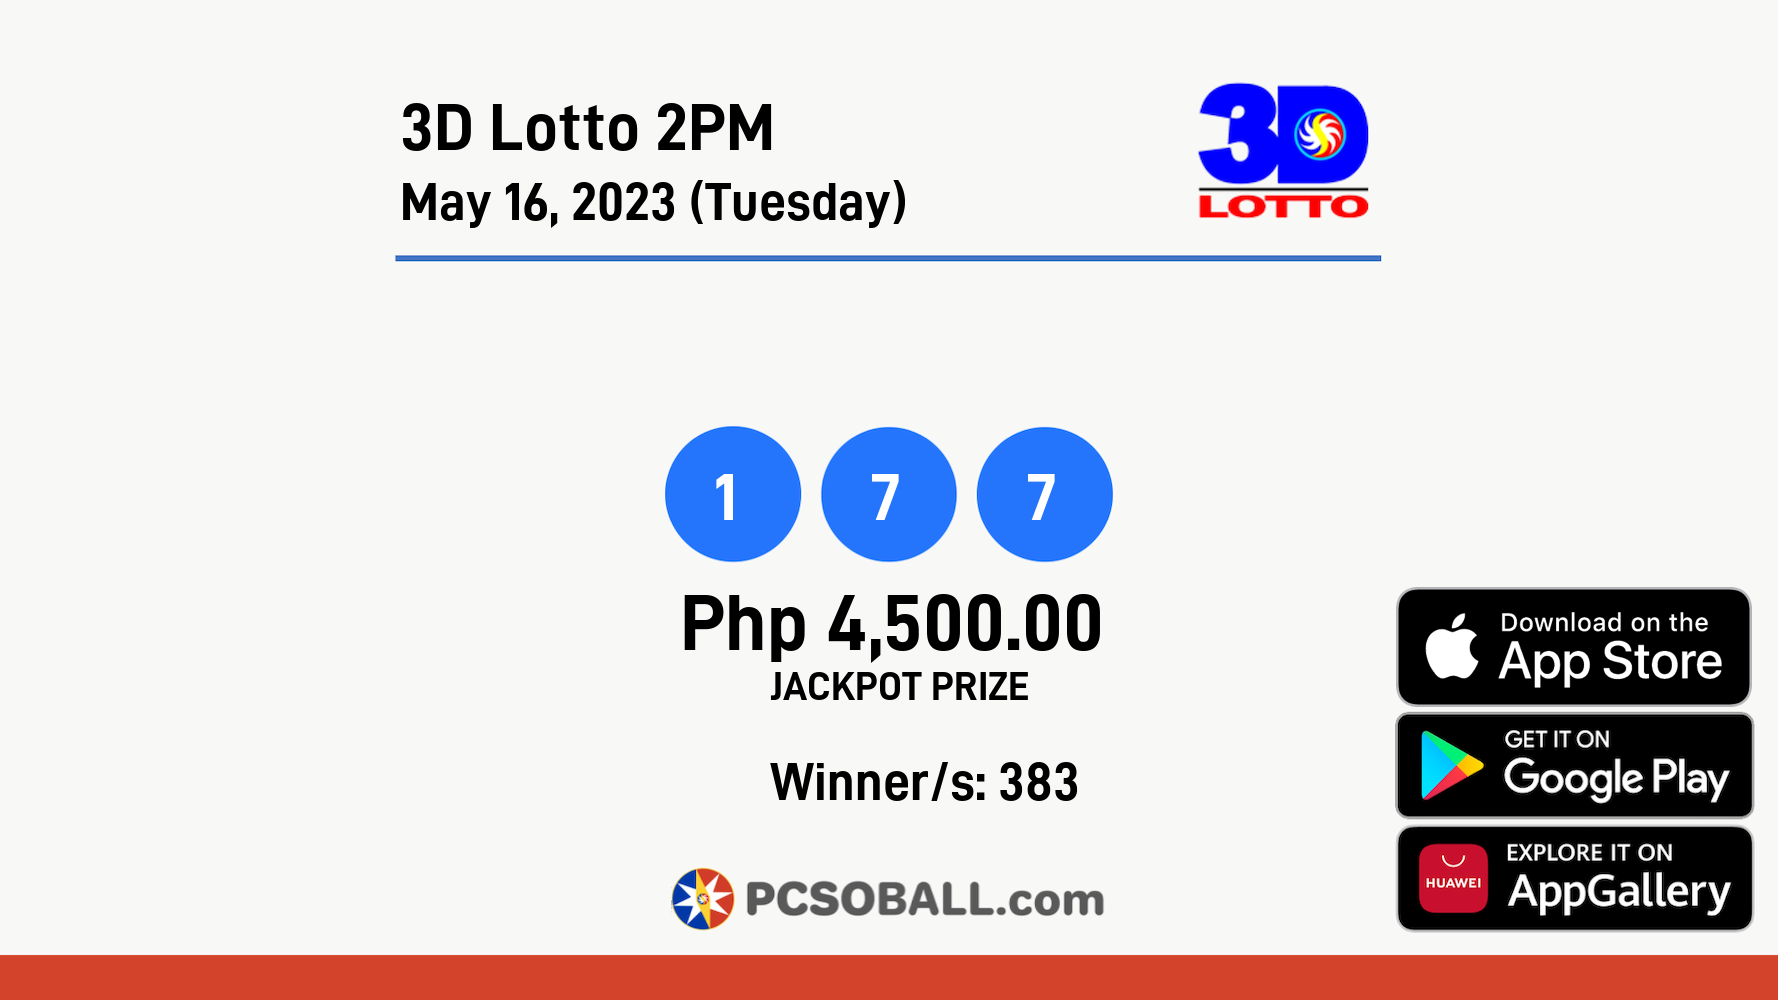 3D Lotto 2PM May 16, 2023 (Tuesday) Result